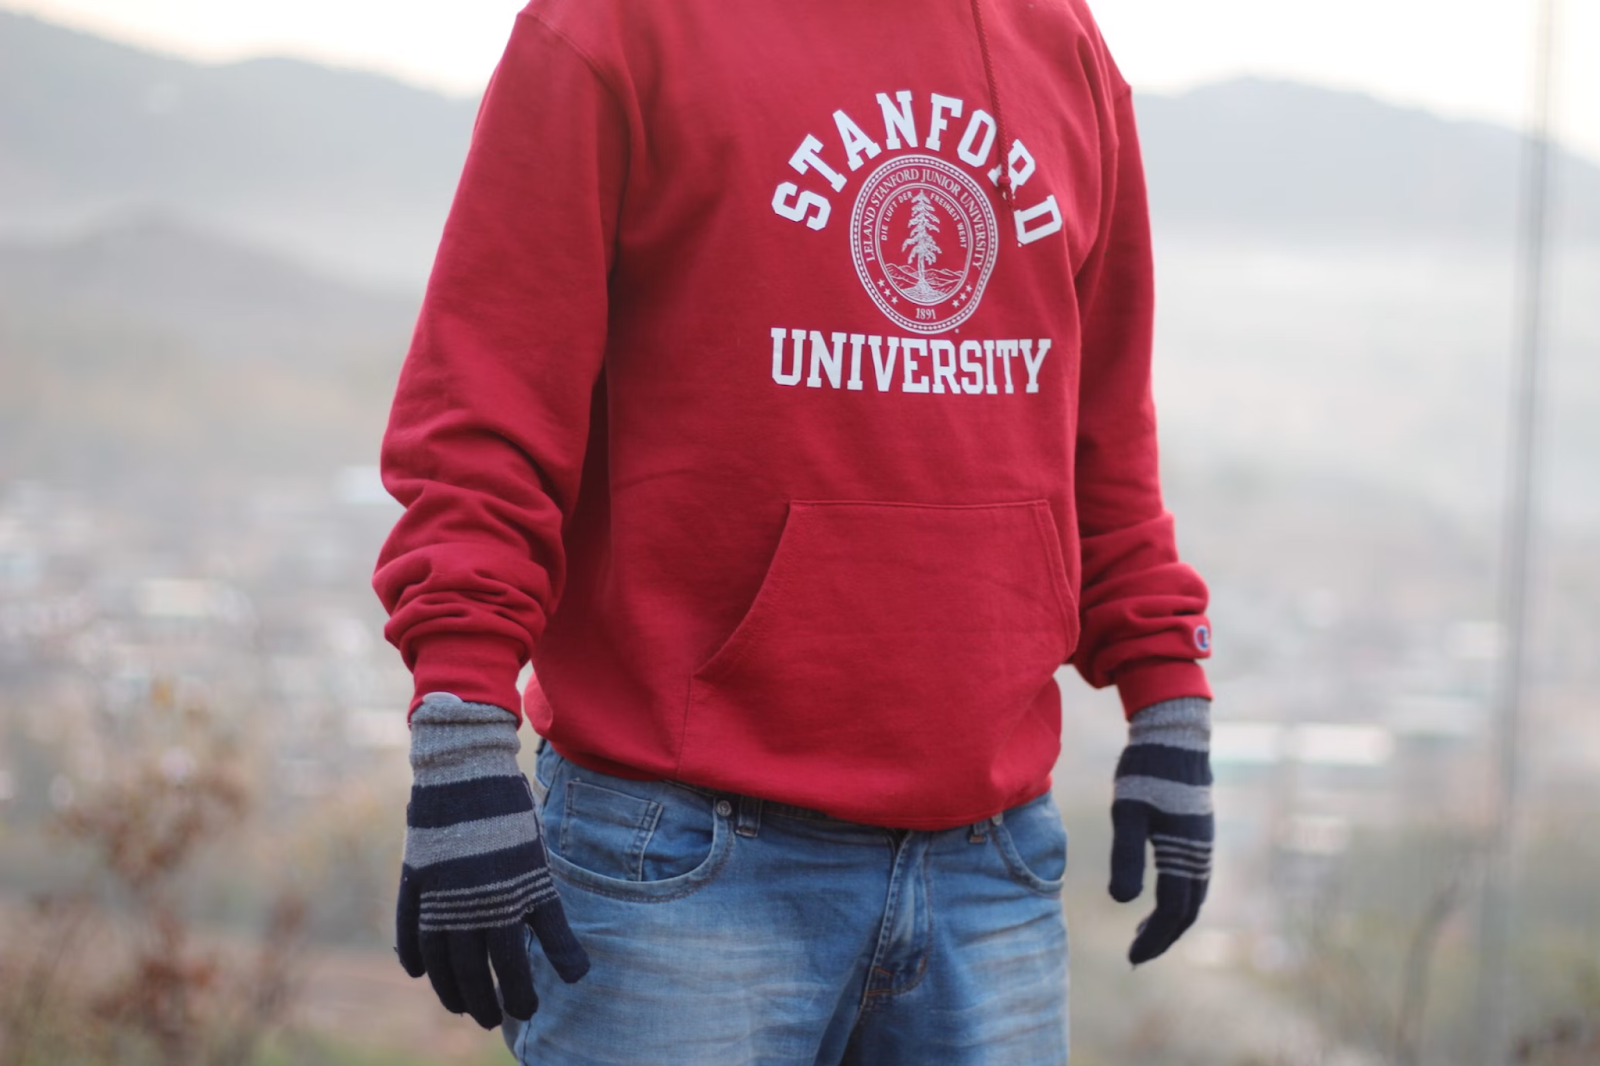 Person wearing custom sweatshirt with university logo on the front